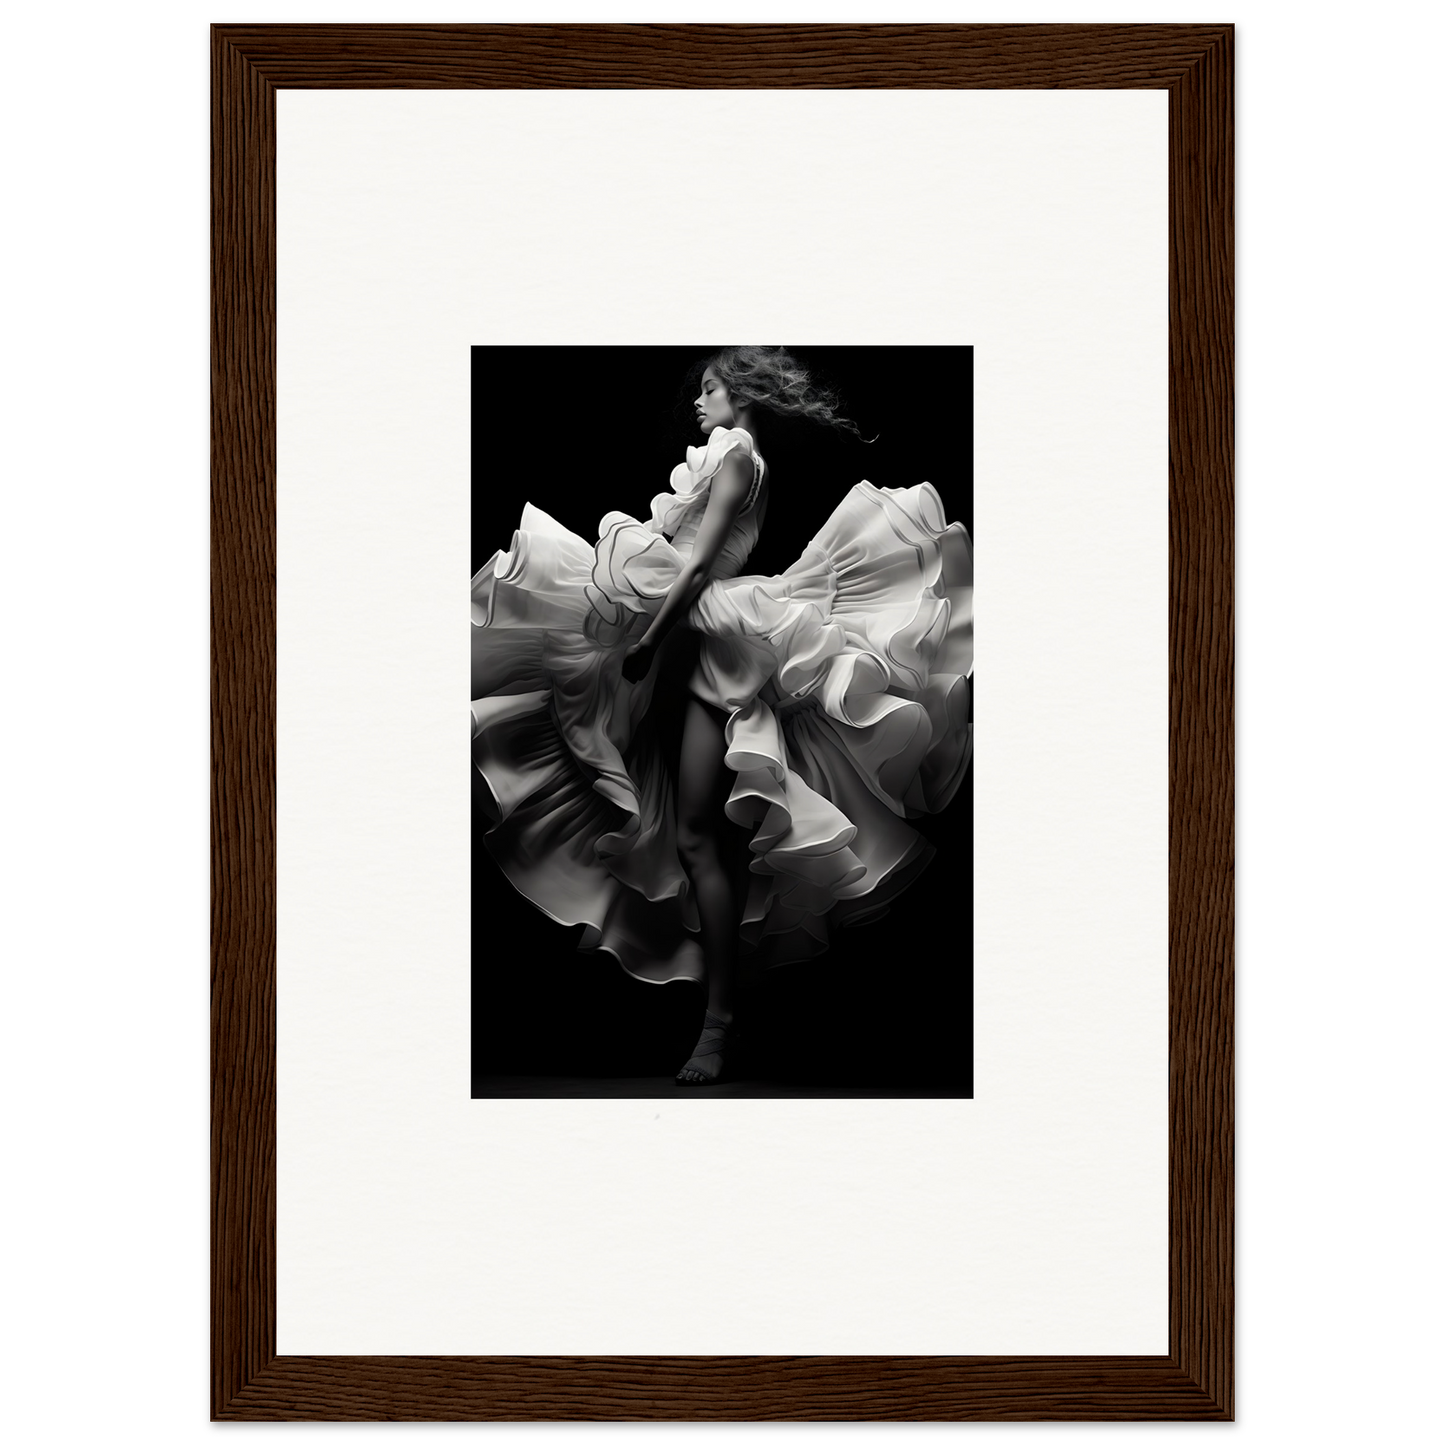 Dancers and time 05p - framed poster - a4 21x29.7 cm / 8x12″